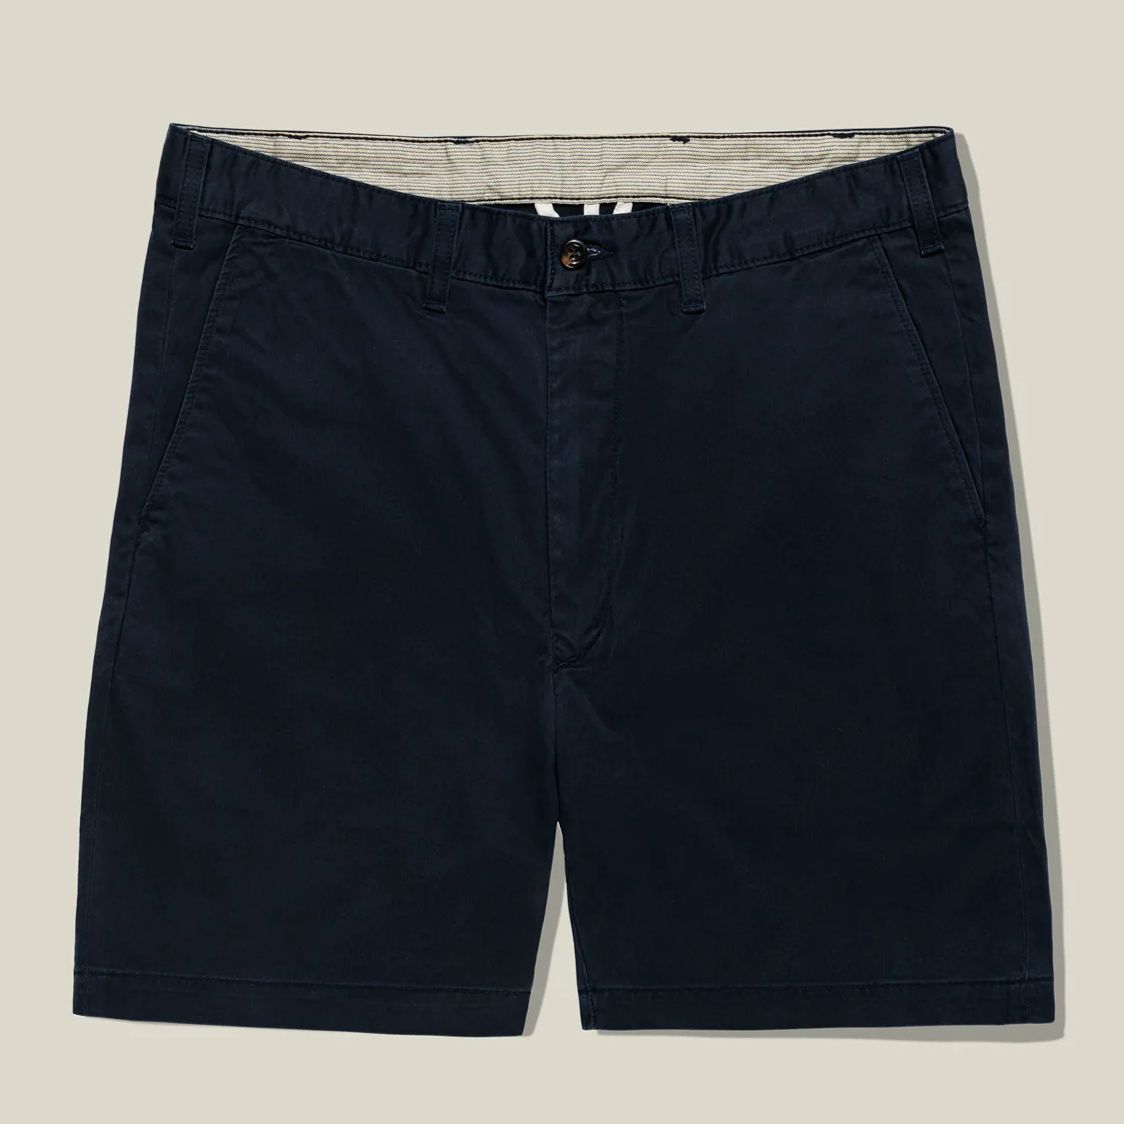 M3 Straight Fit Broken-In Chamois Twill Shorts in Navy by Bills Khakis